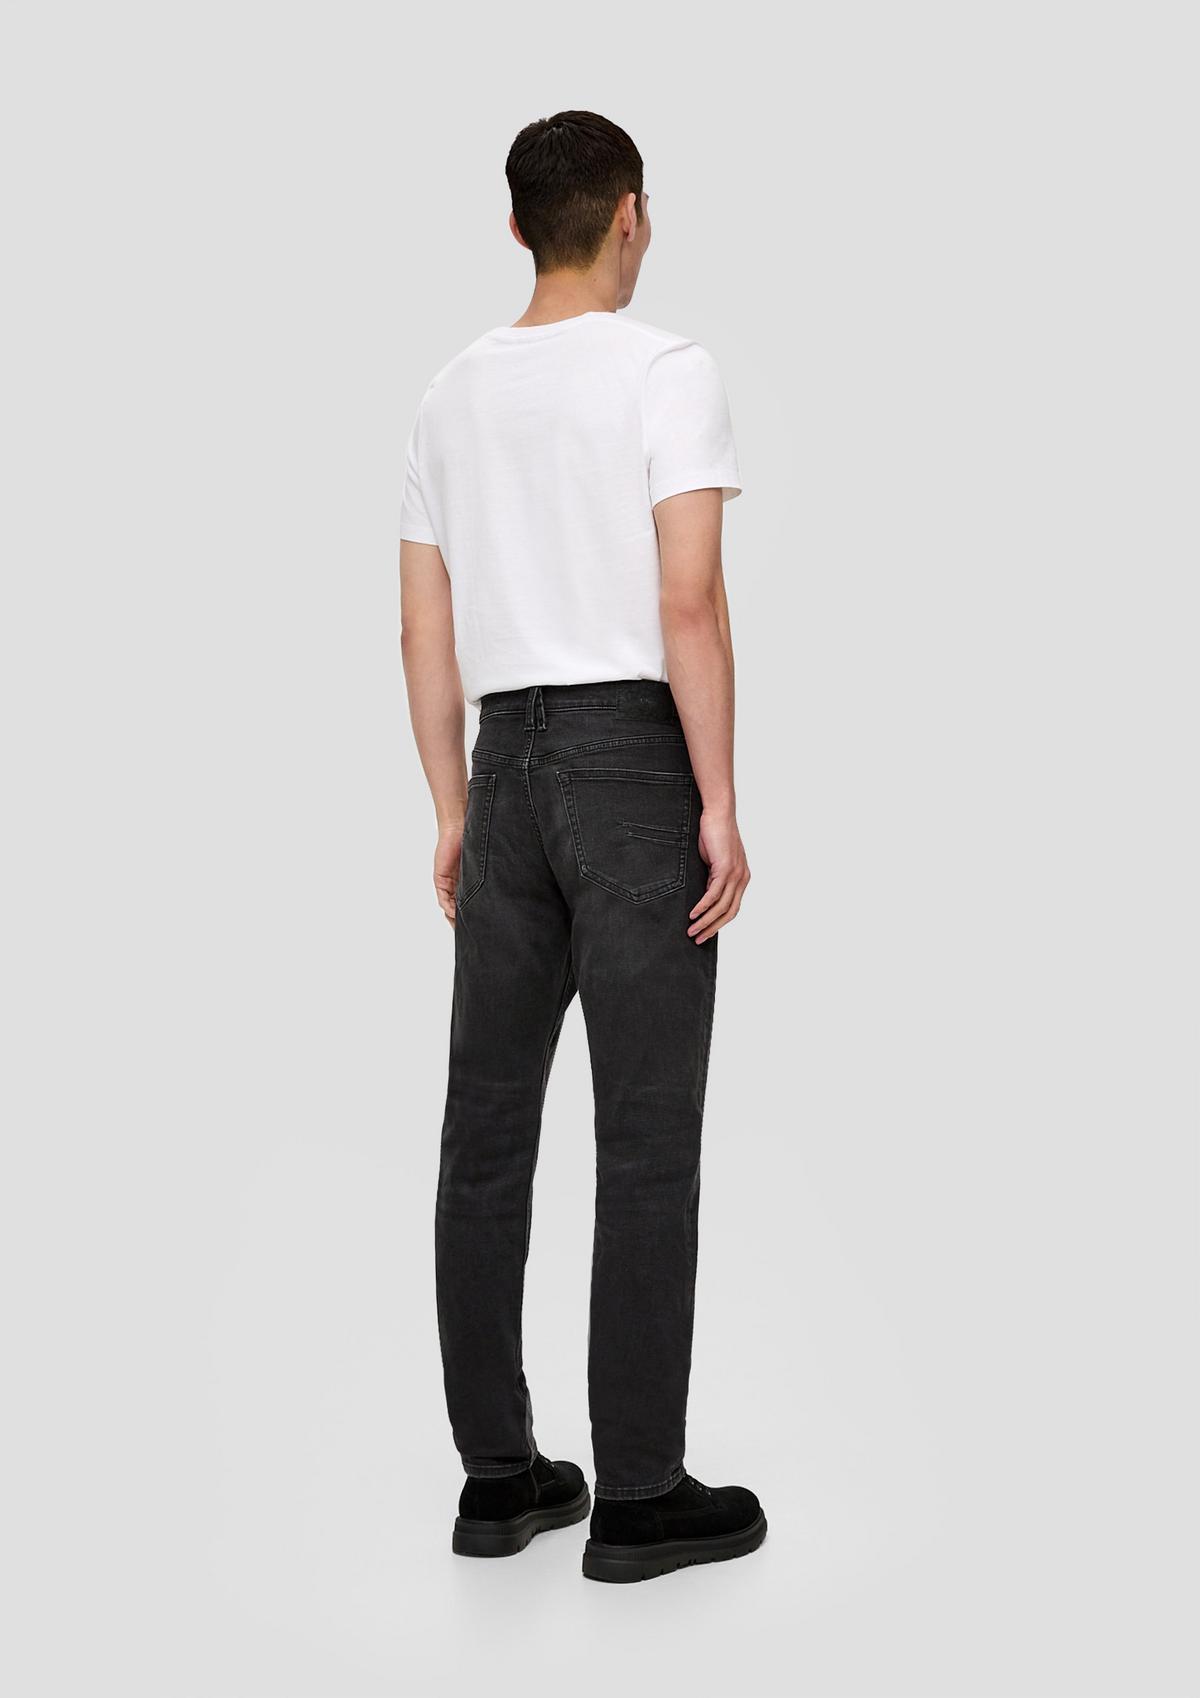 s.Oliver Jeans Mauro / Regular Fit / High Rise / Tapered Leg 